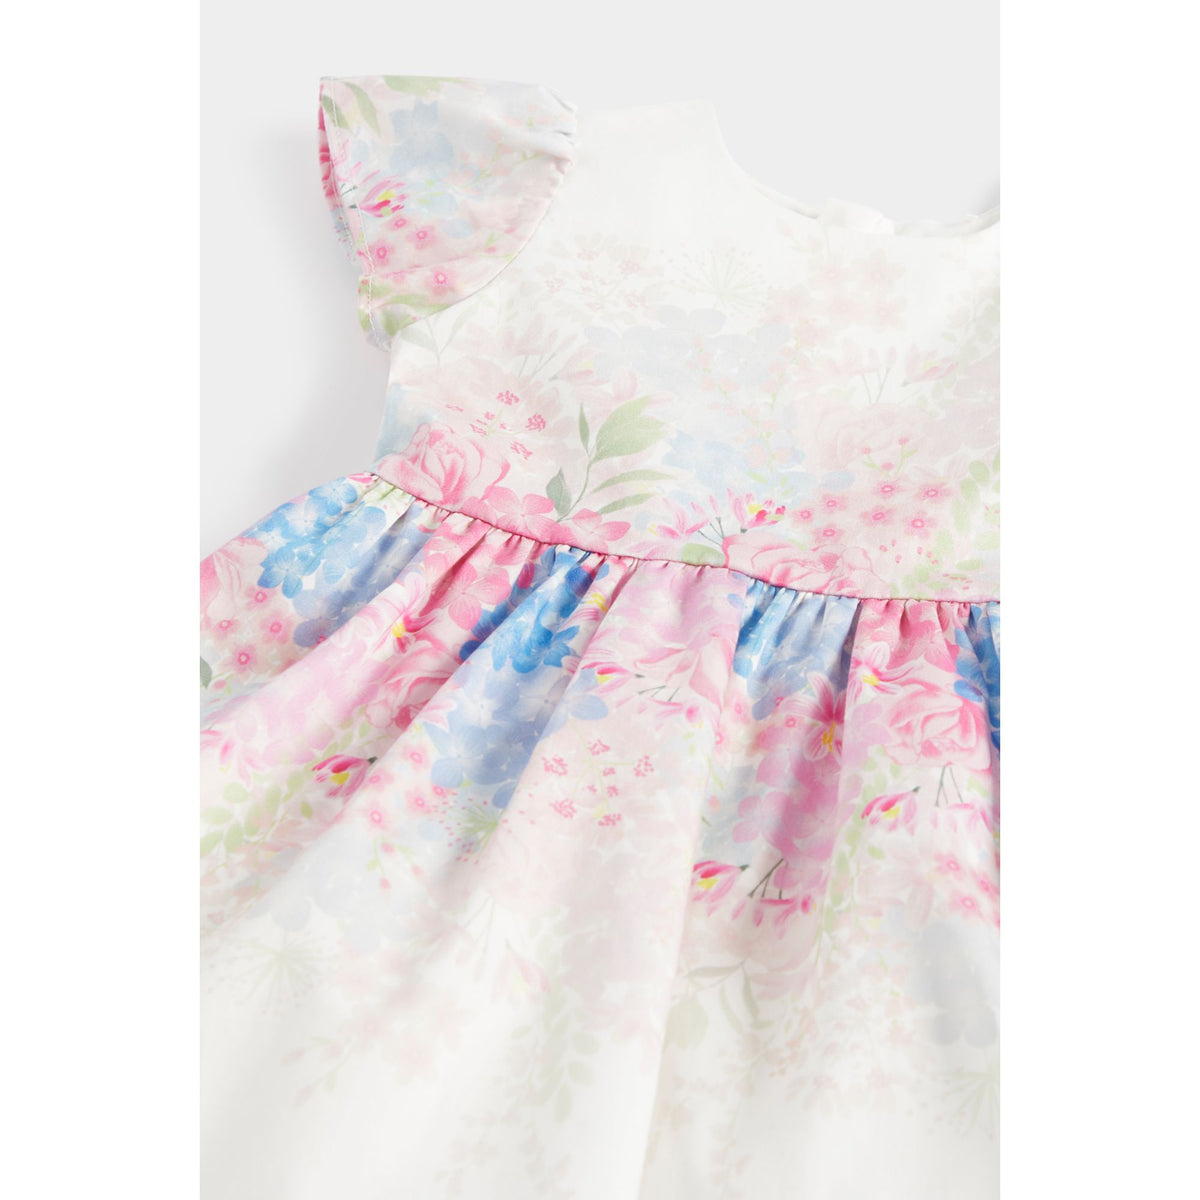 Mothercare Philippines - Maternity dress from MOTHERCARE's Blooming  Marvellous collection ;)